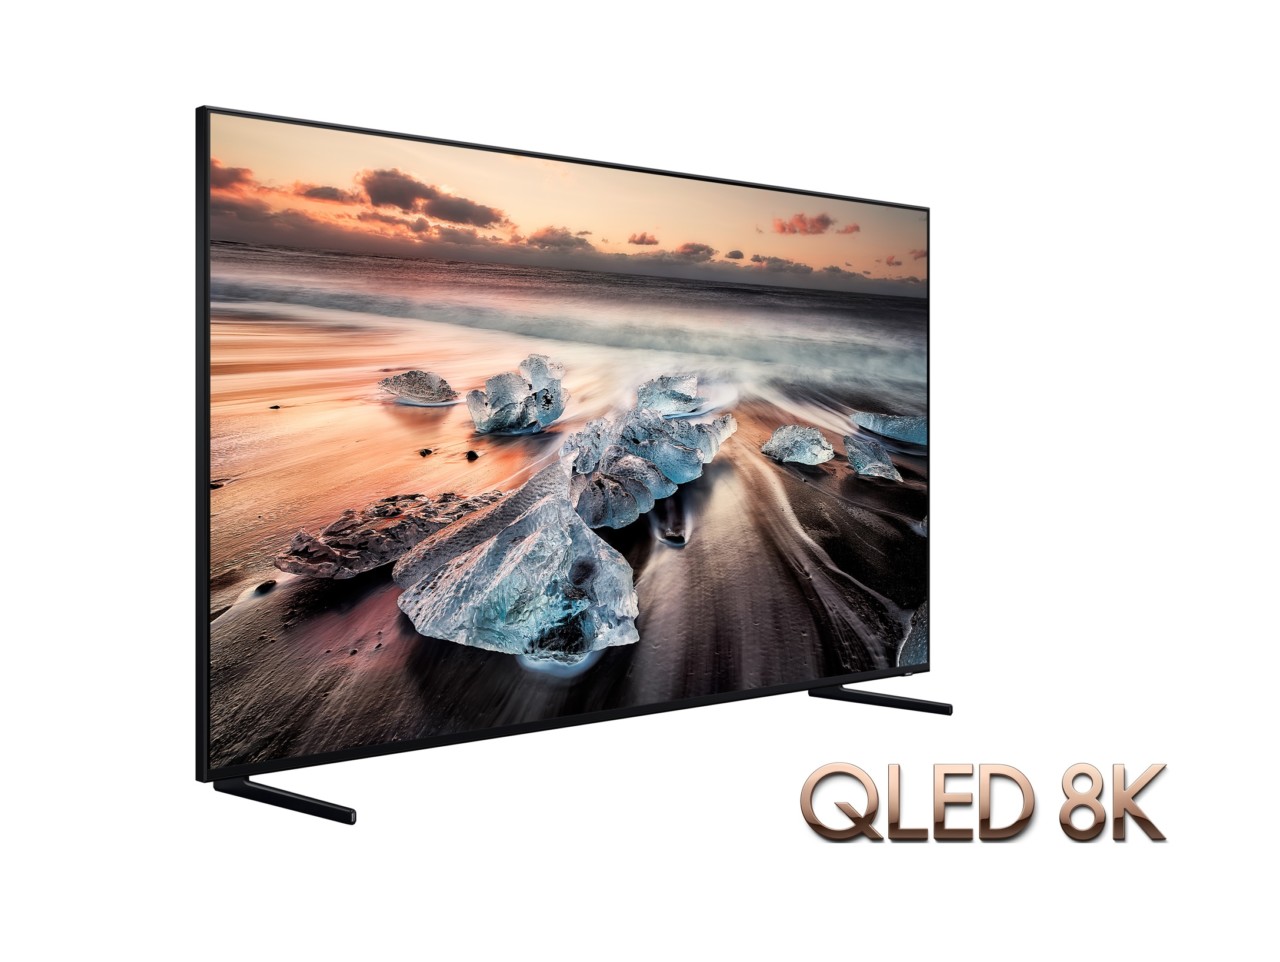 Samsung Q900R 8K QLED TV lineup announced, goes on sale next month - Gizmochina